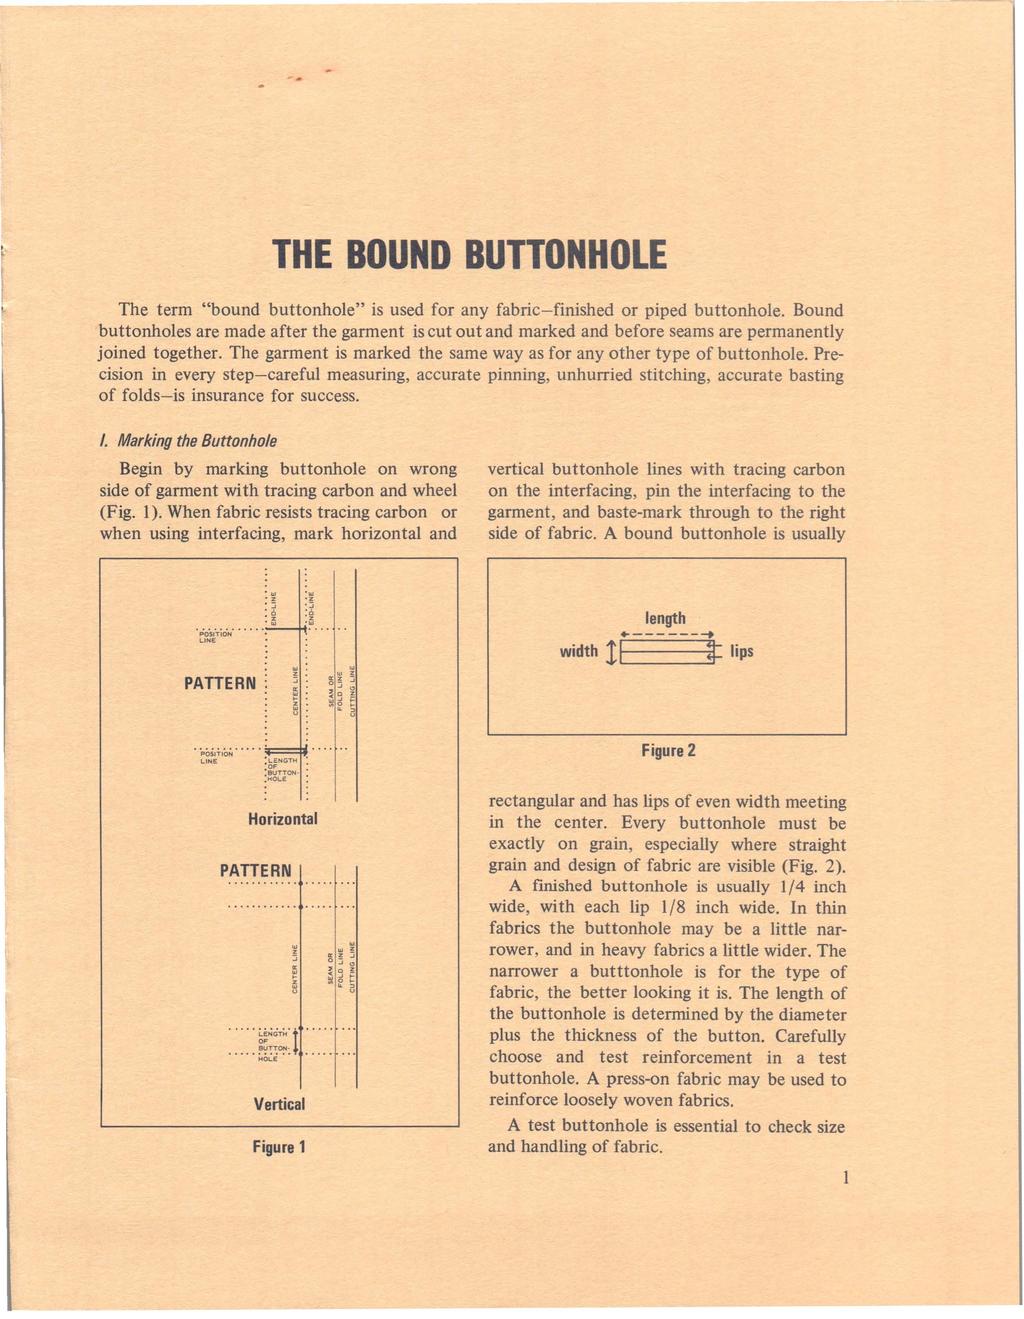 THE BOUND BUTTONHOLE The term "bound buttonhole" is used for any fabric-finished or piped buttonhole.